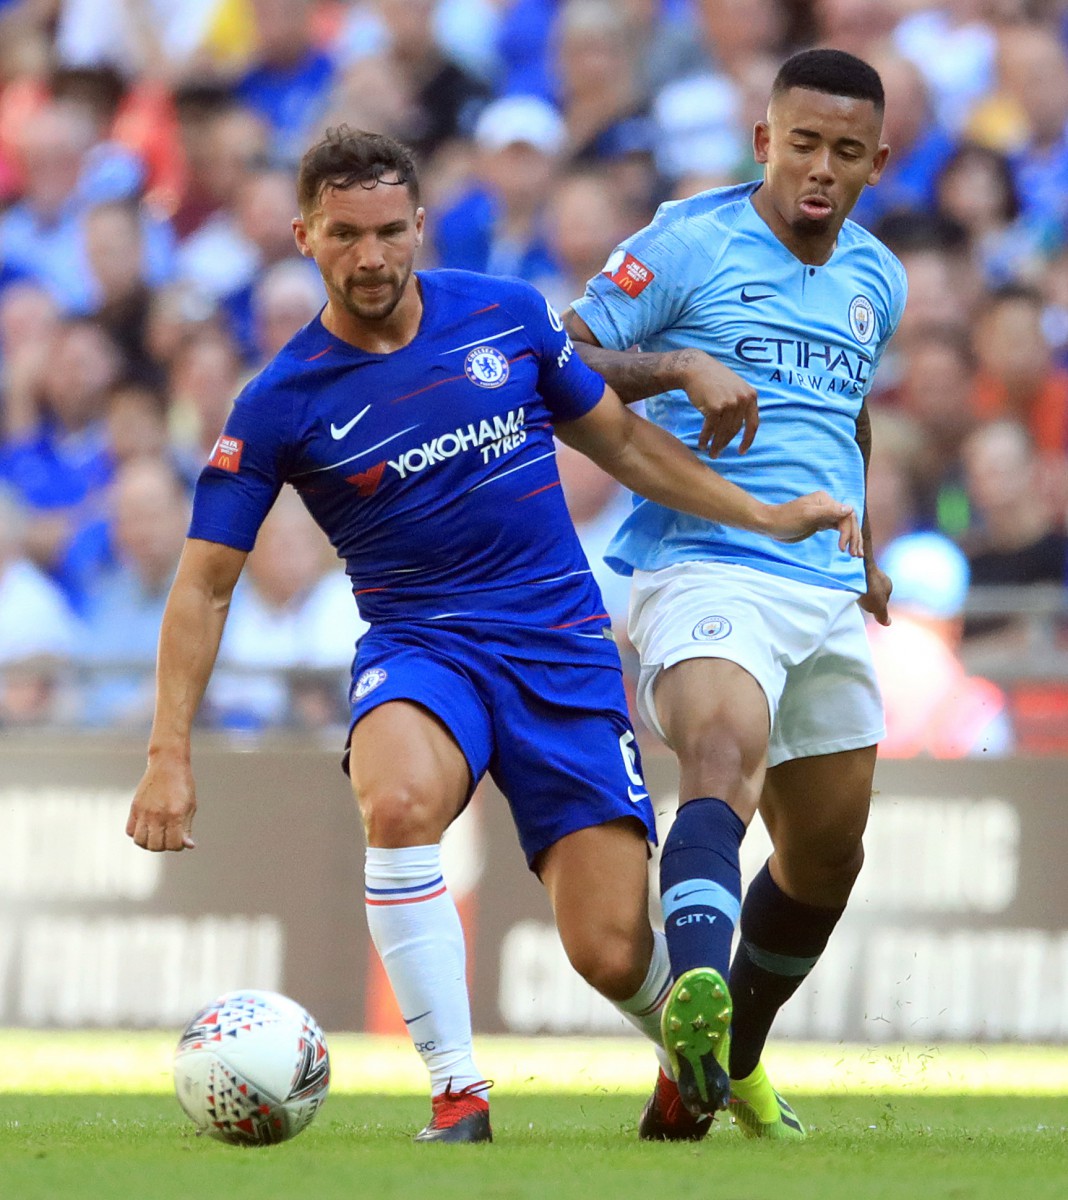 Drinkwater played in just one of Chelsea's 63 matches last season, featuring for 30 minutes in the Community Shield